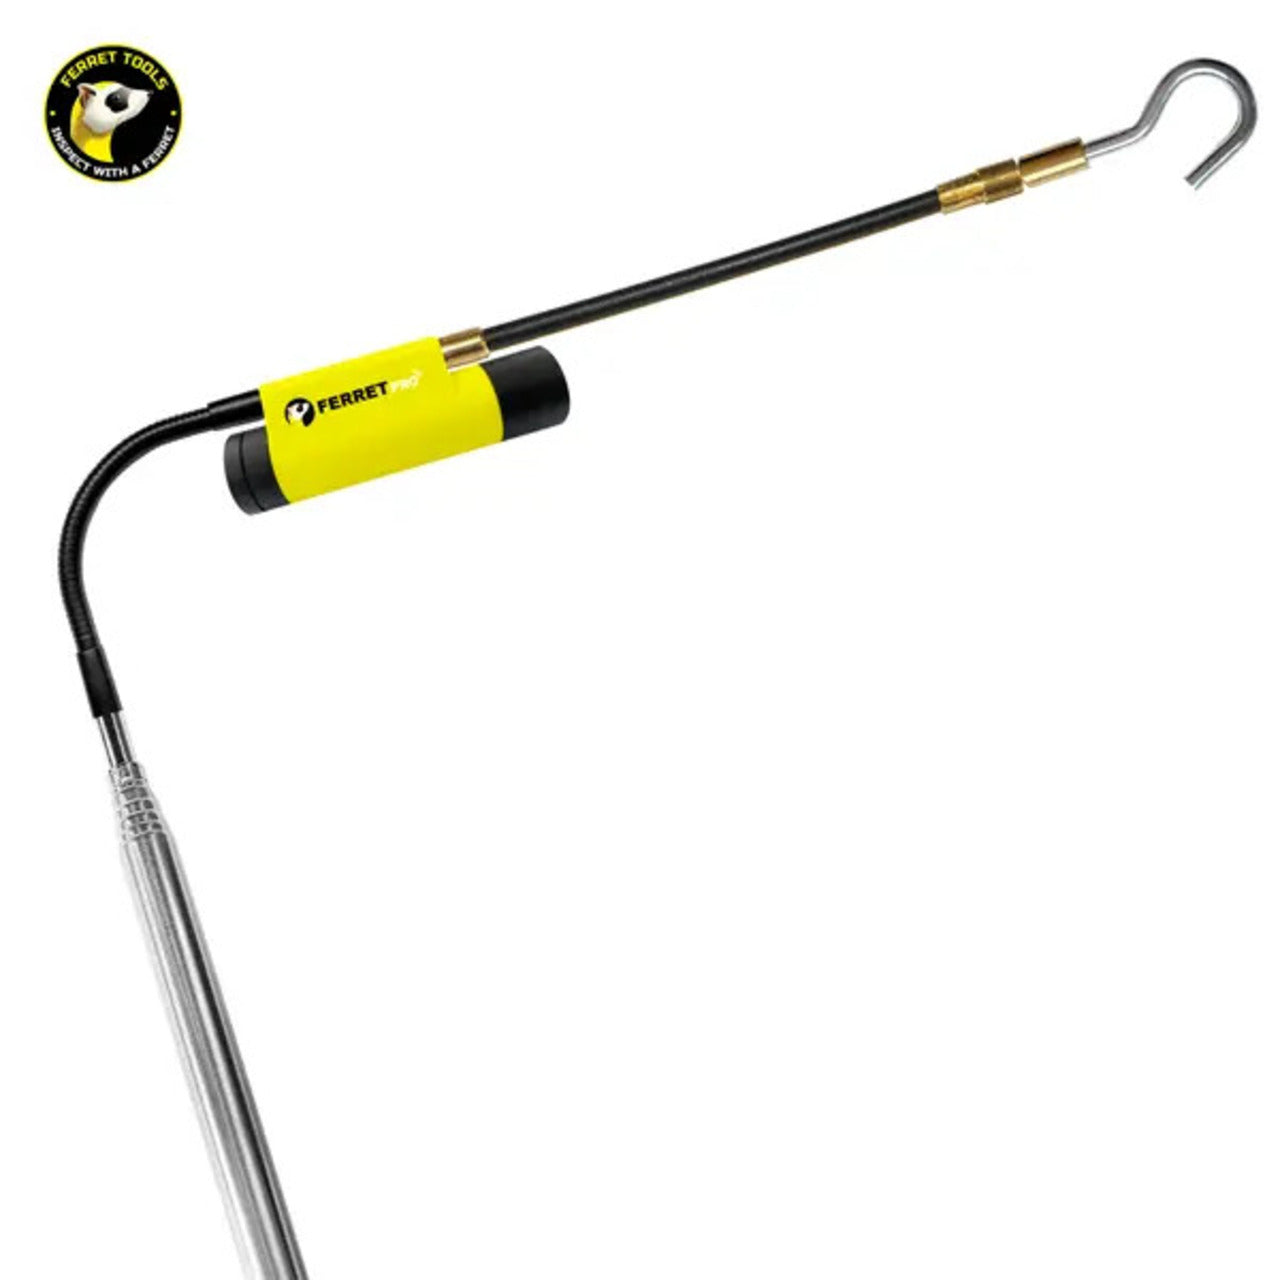 Ferret Pro - Multipurpose Wireless Inspection Camera and Cable Pulling Tool